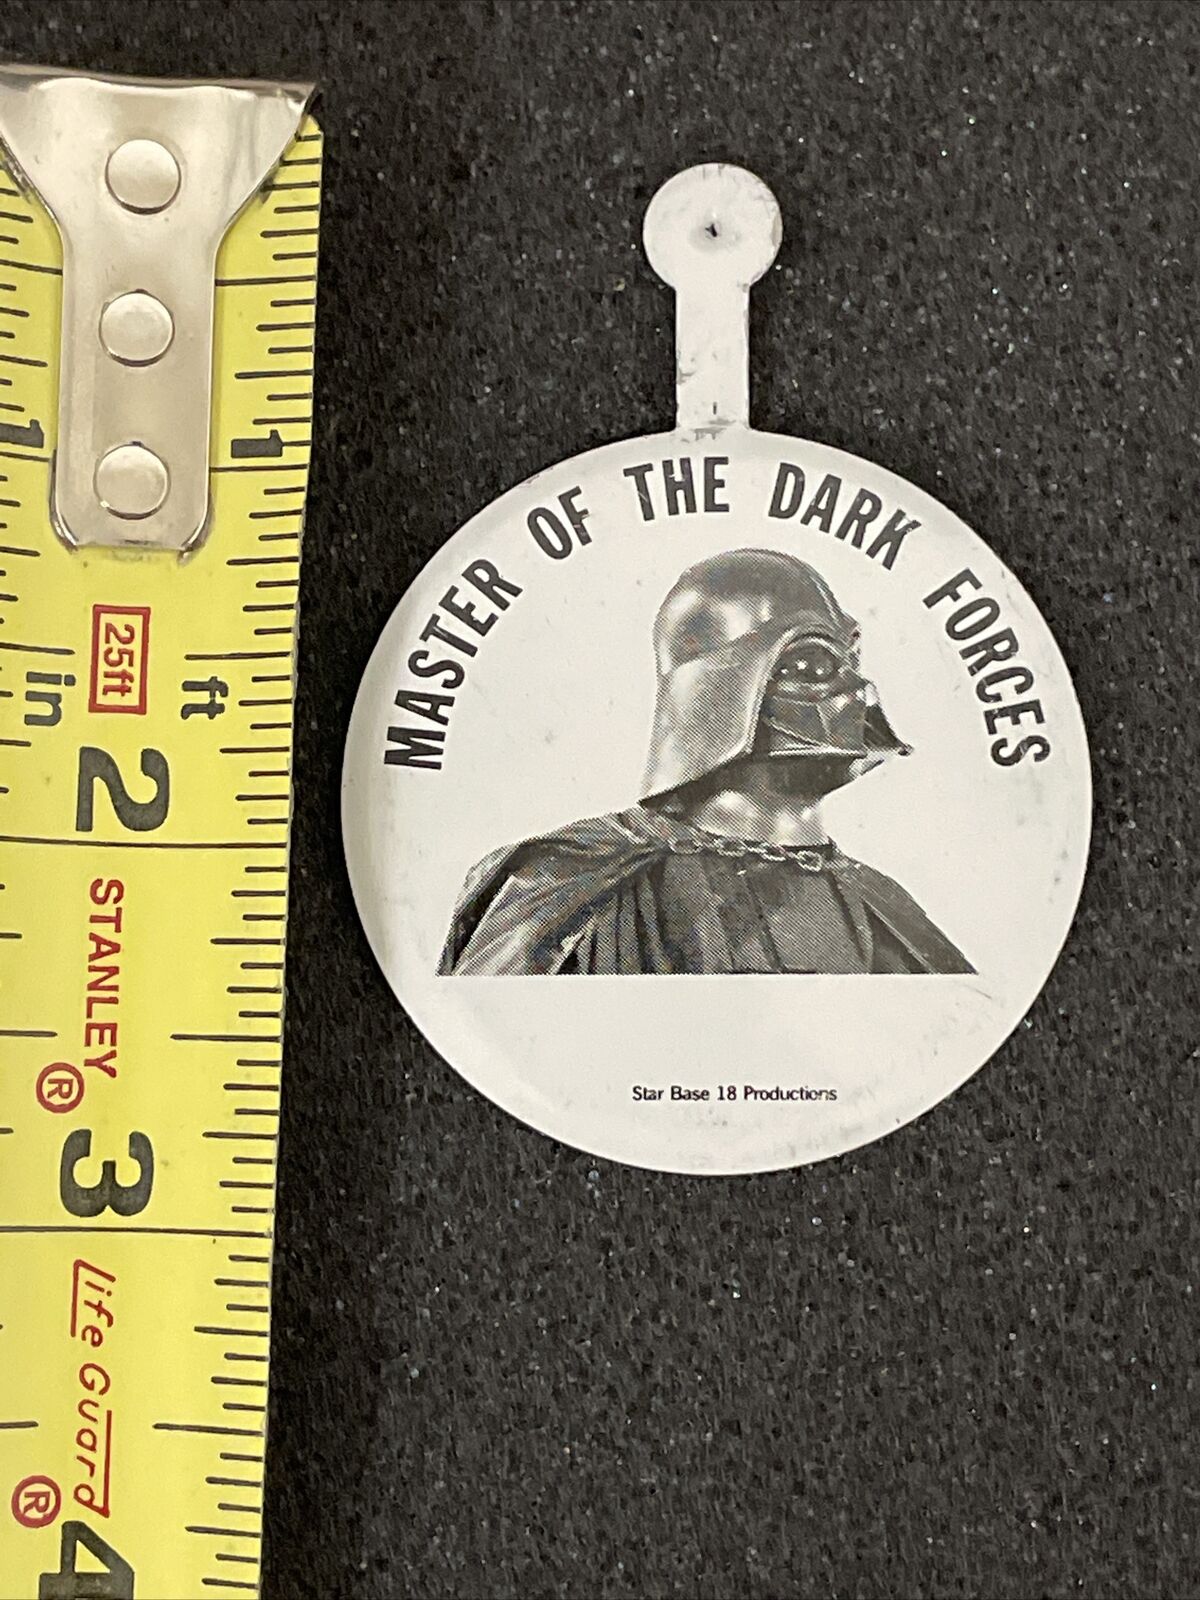 Star Wars Promo Star Base 18 Darth Vader Button 1970's MASTER OF THE DARK FORCES